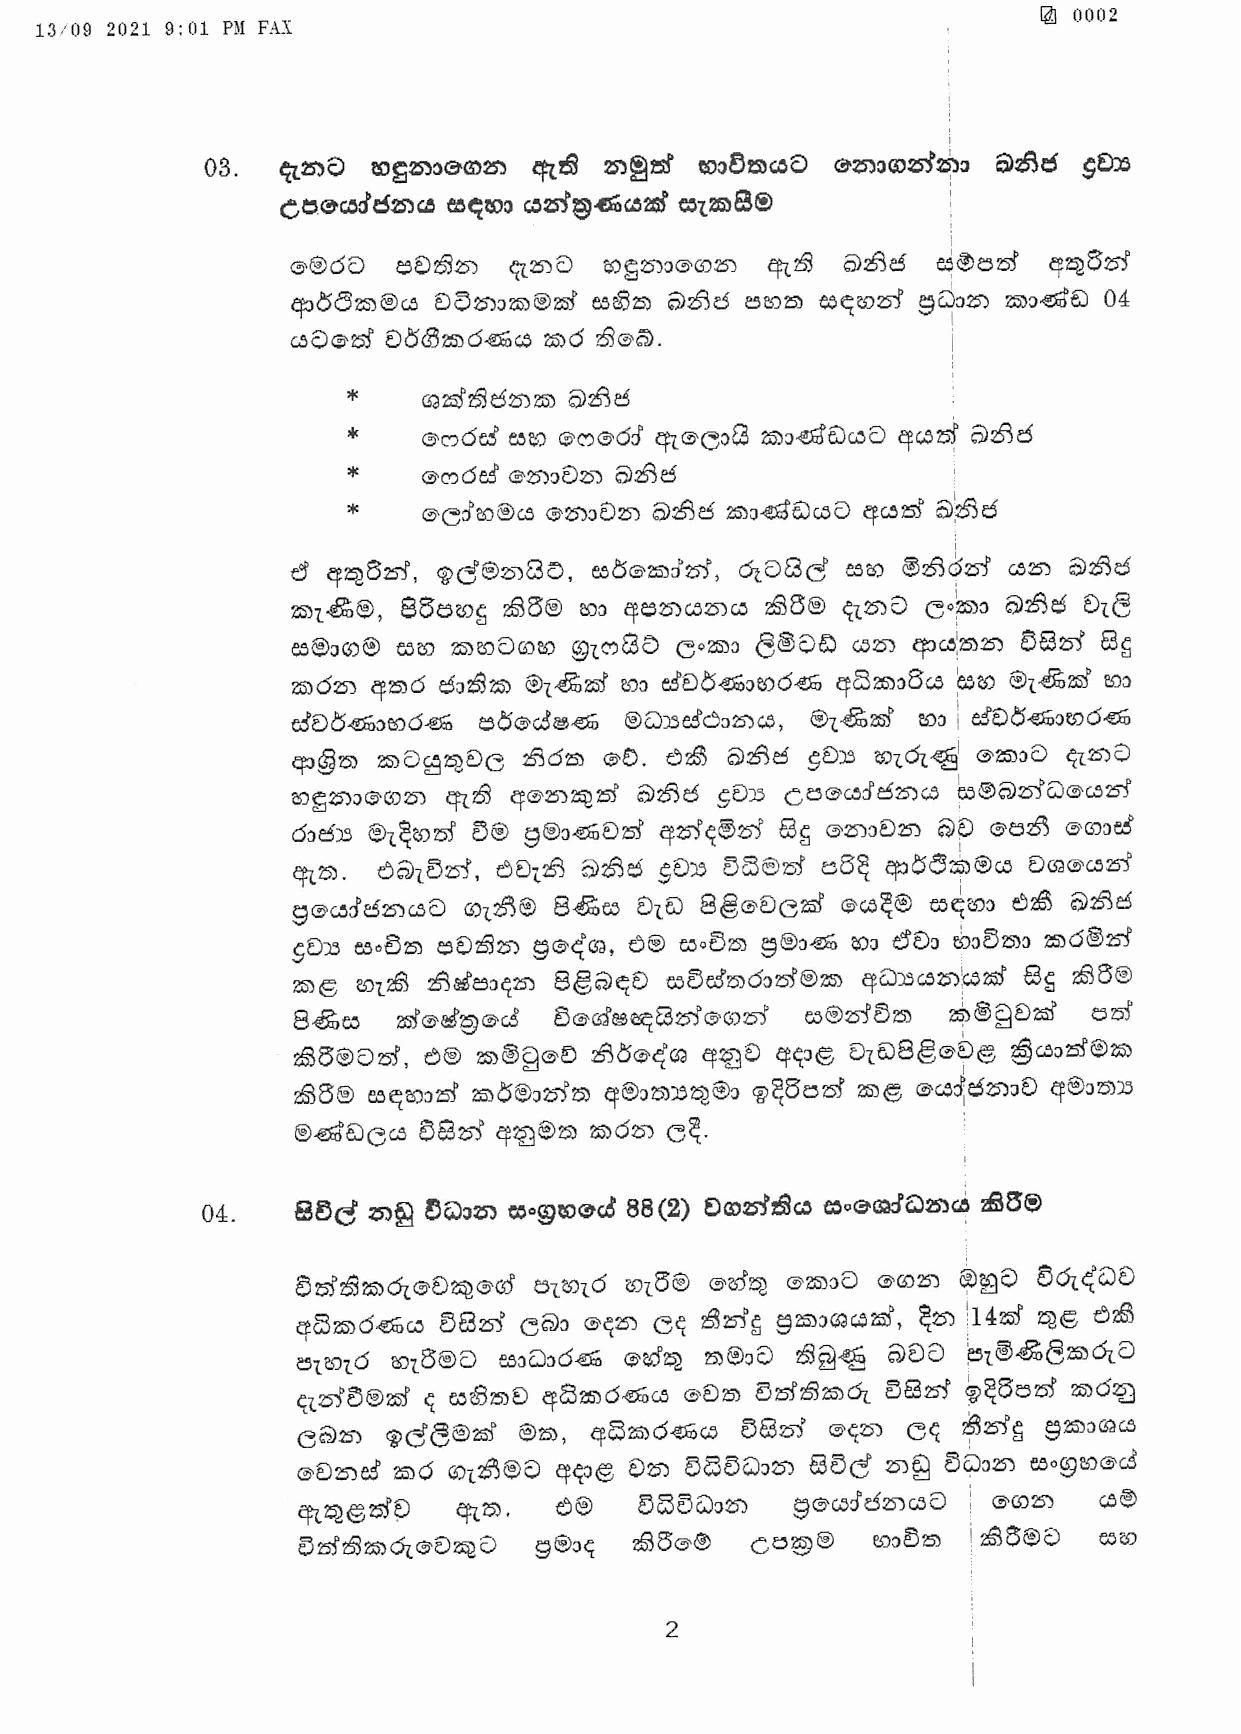 Cabinet Decision on 13.09.2021 page 002